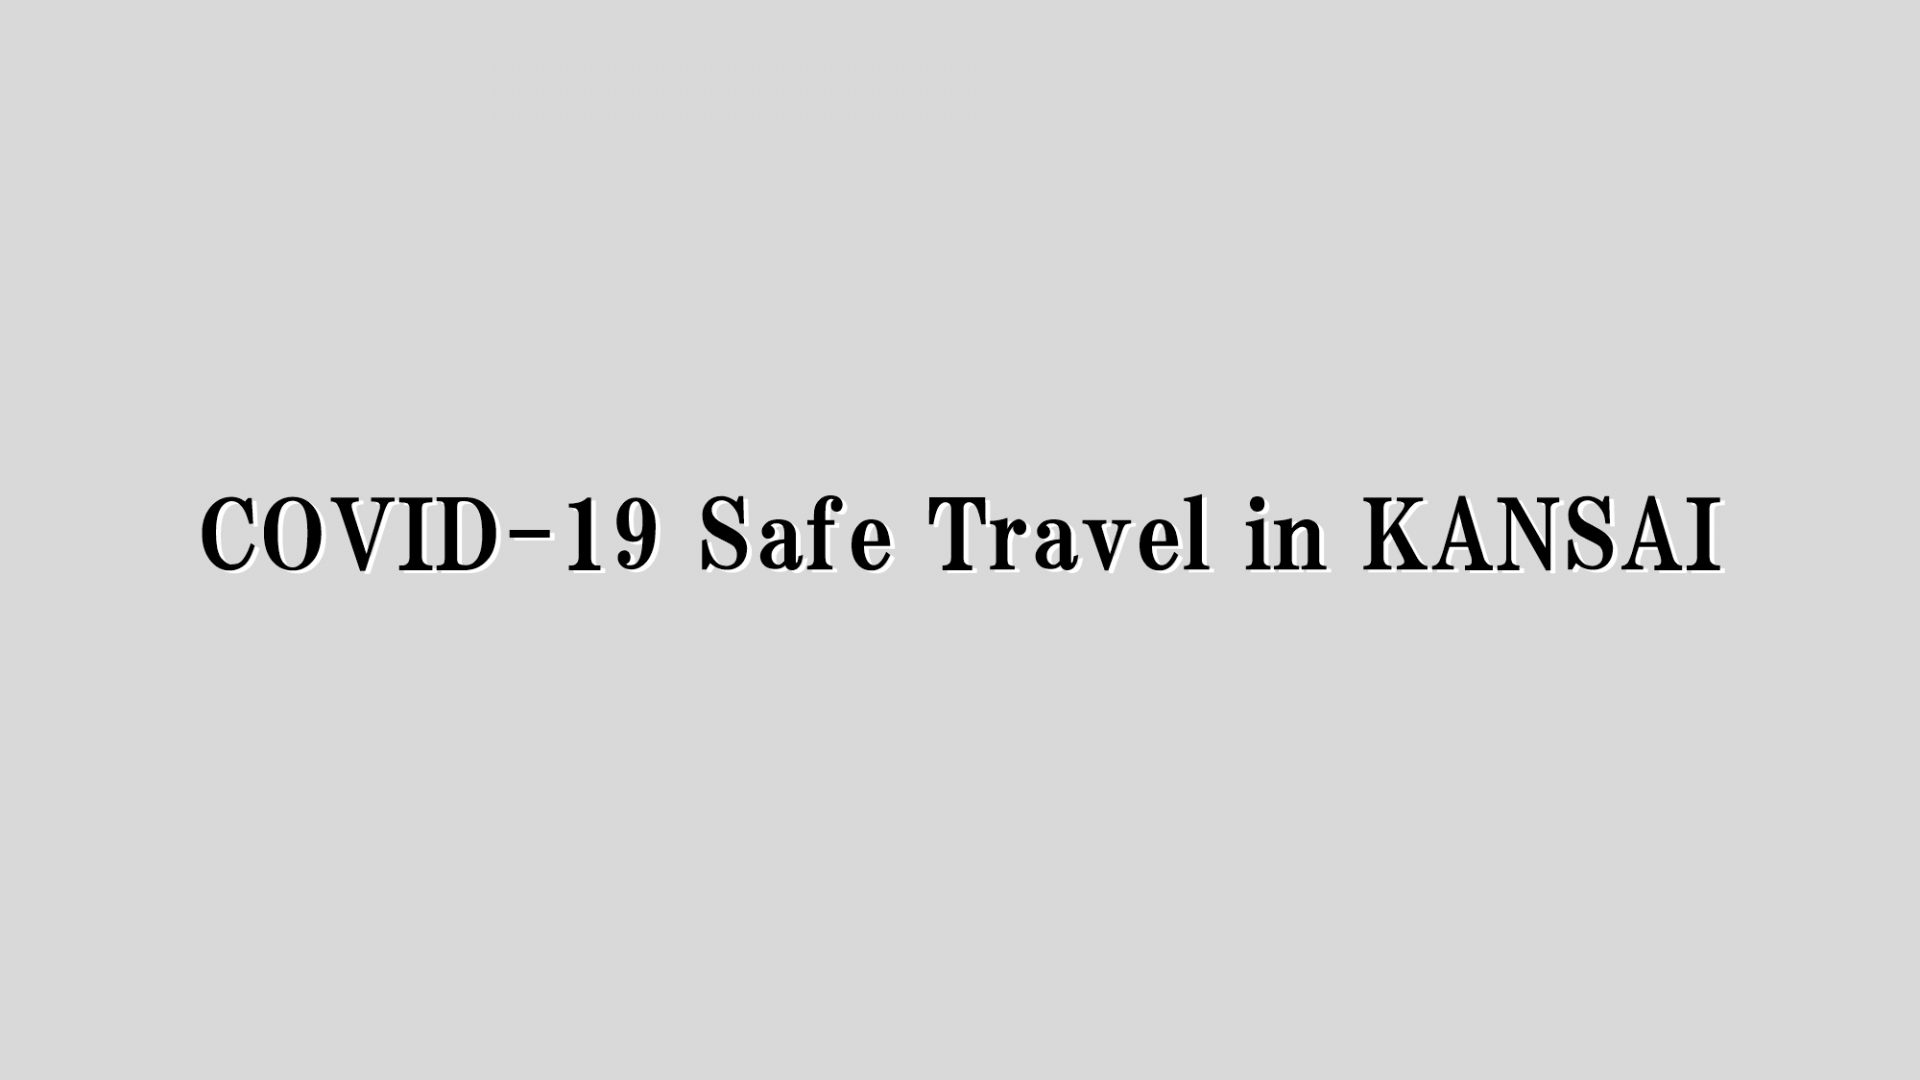 Enjoy your trip to KANSAI, with some hints and tips to keep you safe